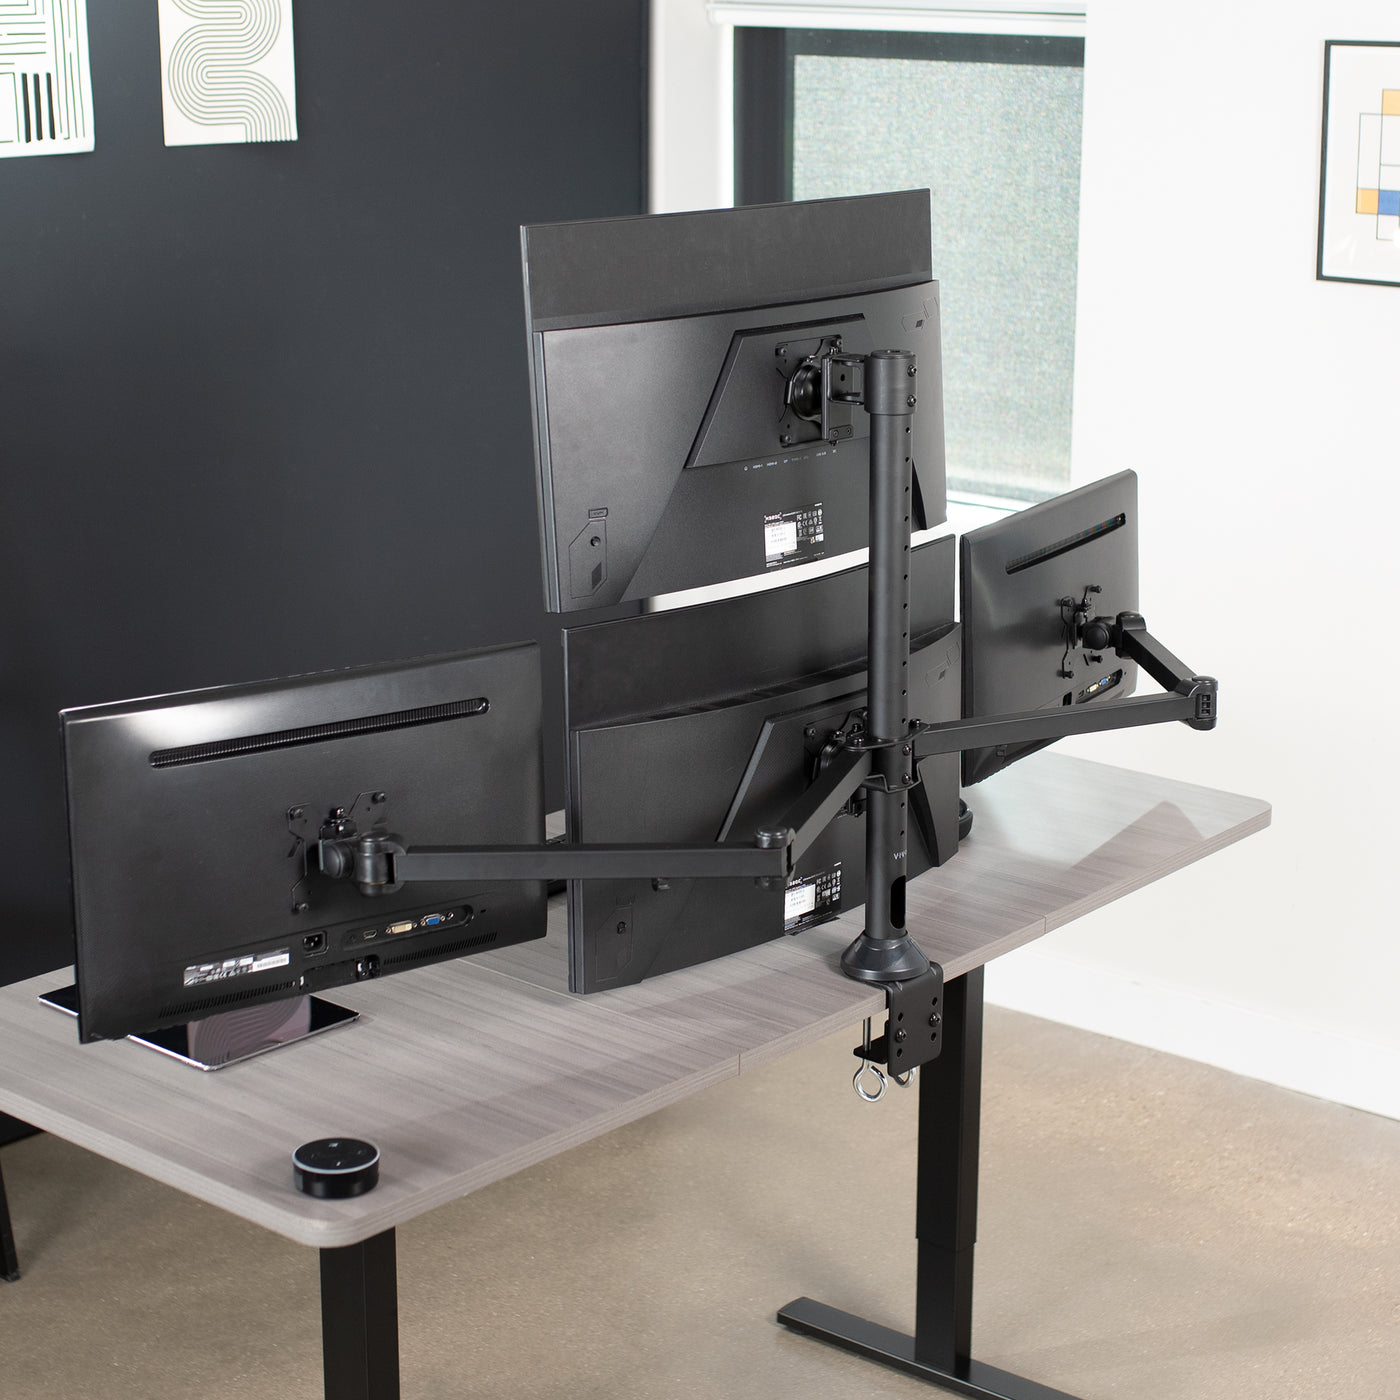 Quad monitor desk mount gives user multiple screens on one stand to multitask and have more viewing flexibility.